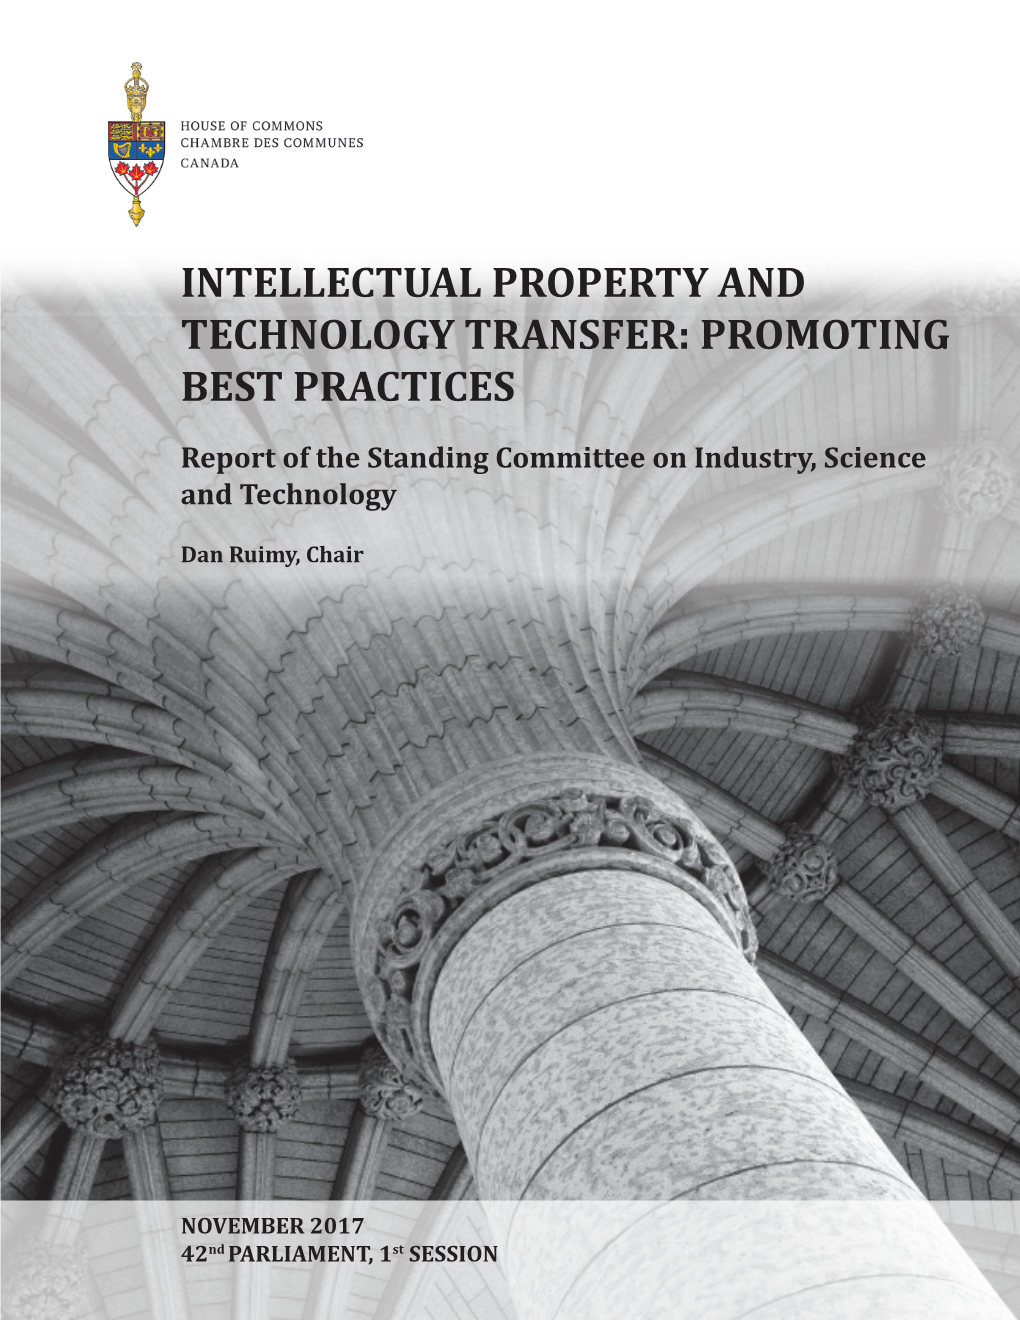 Intellectual Property and Technology Transfer: Promoting Best Practices